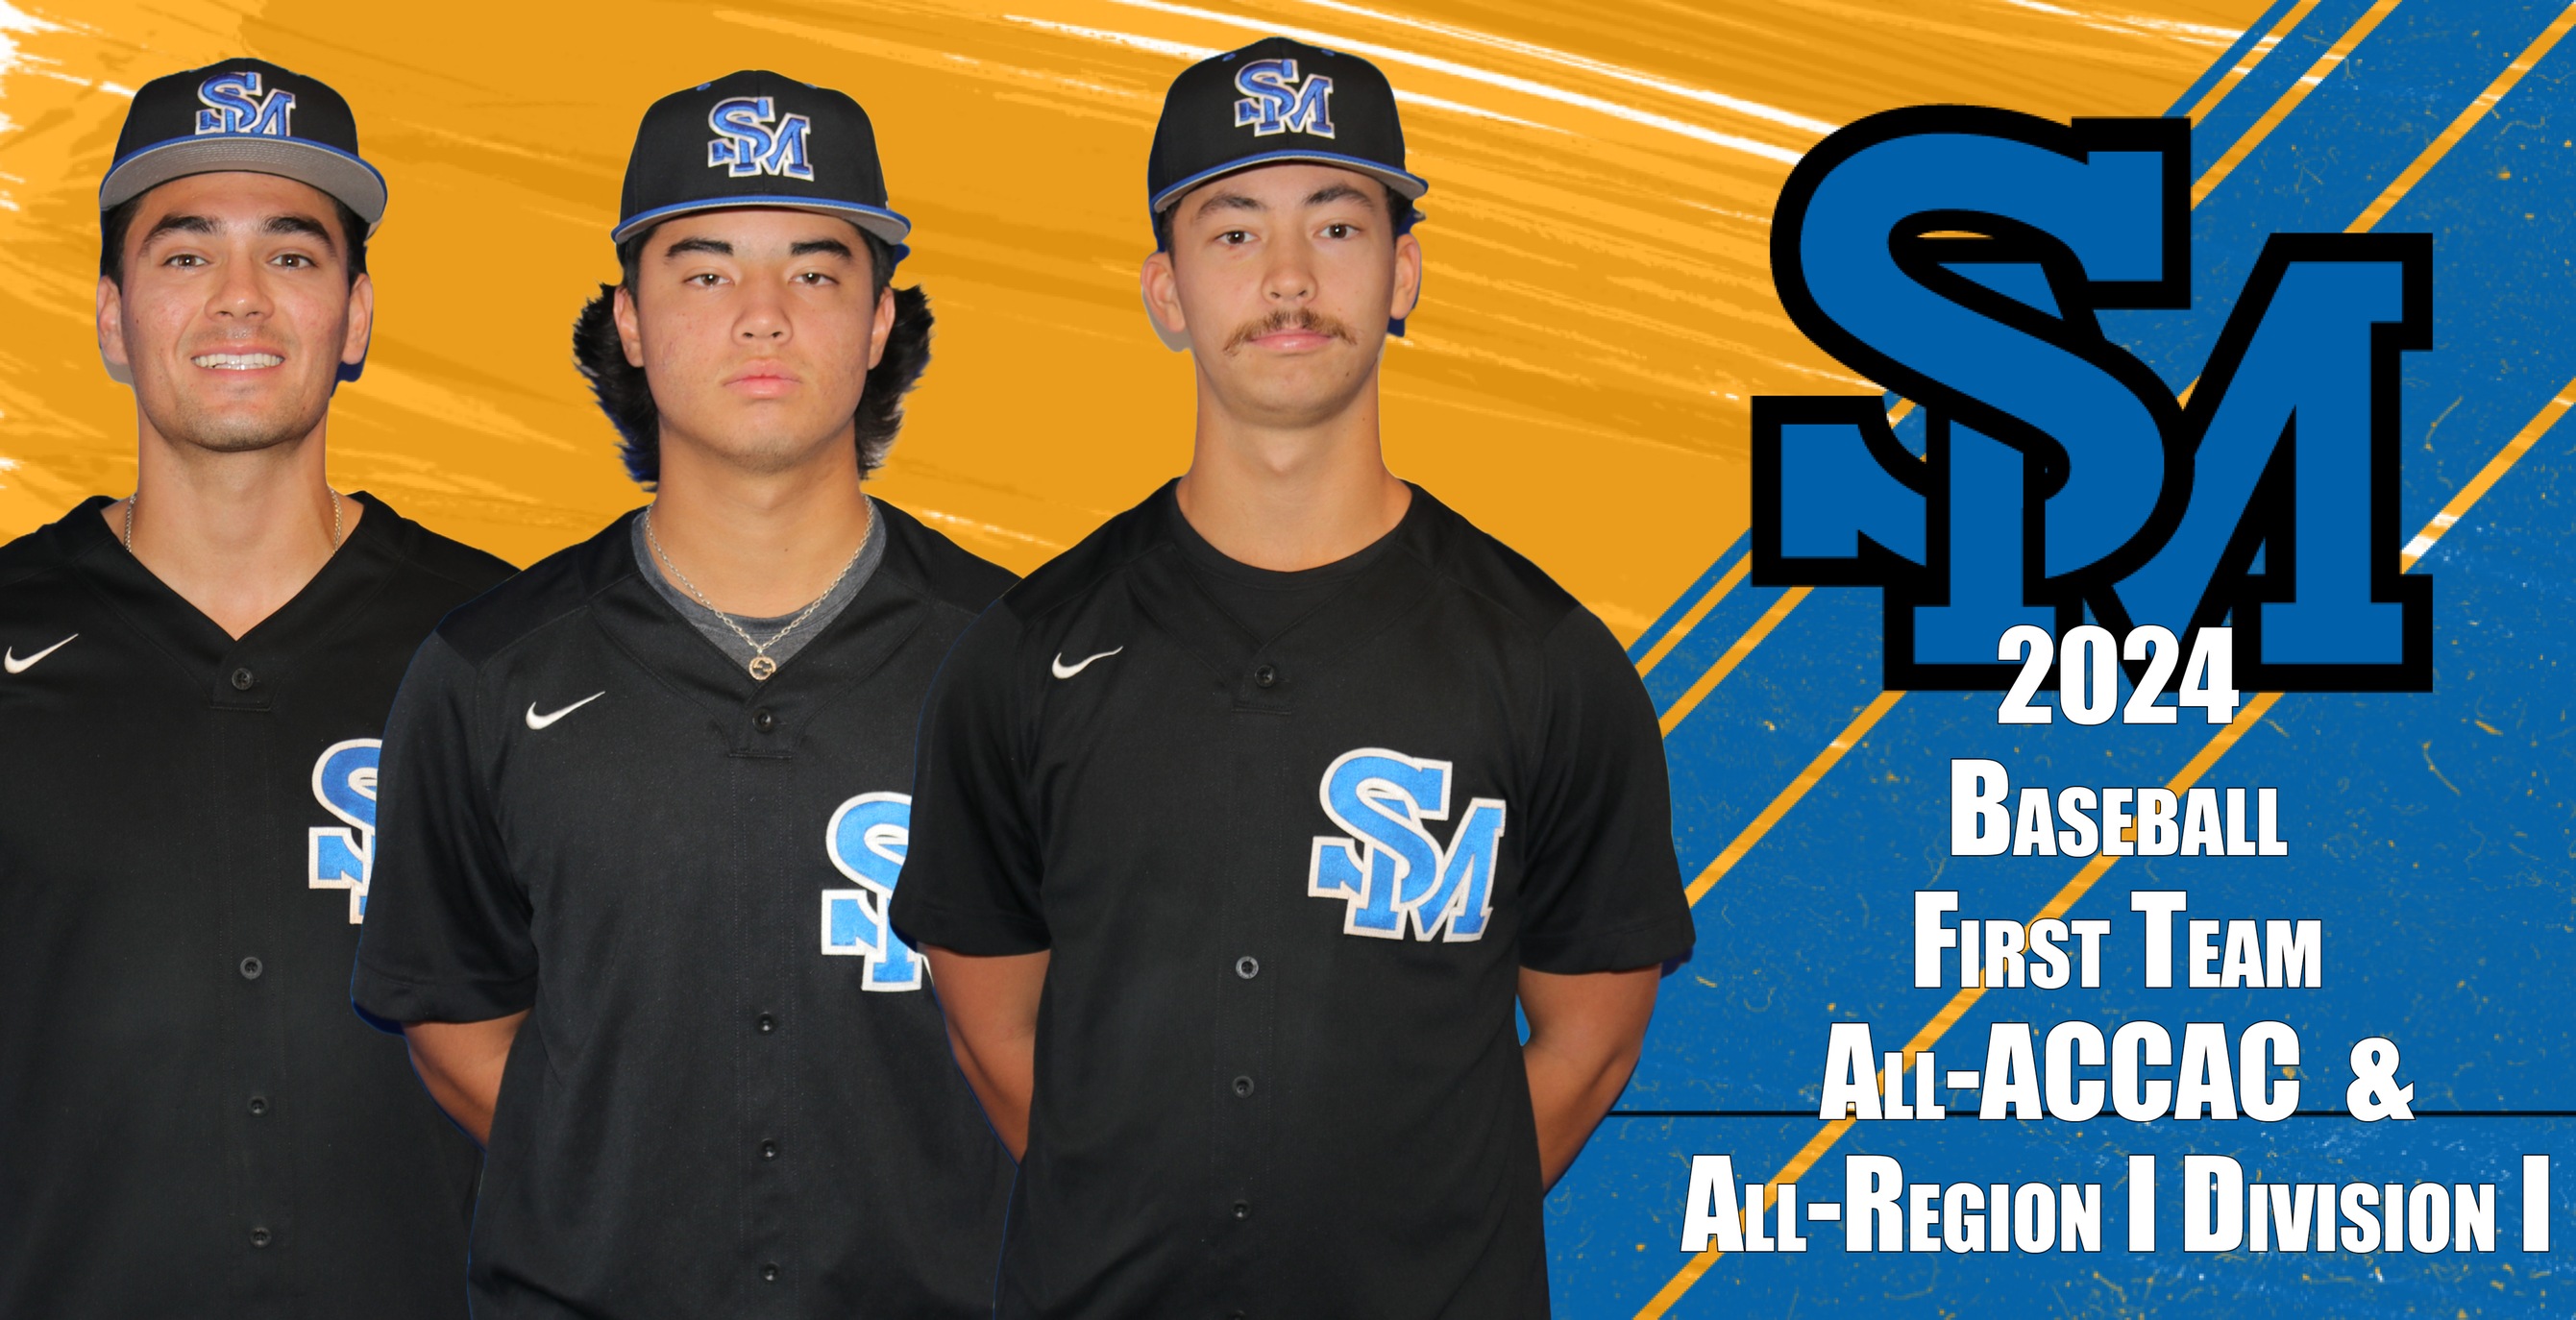 Trio of Cougars Named First Team All-ACCAC, All-Region I Division I